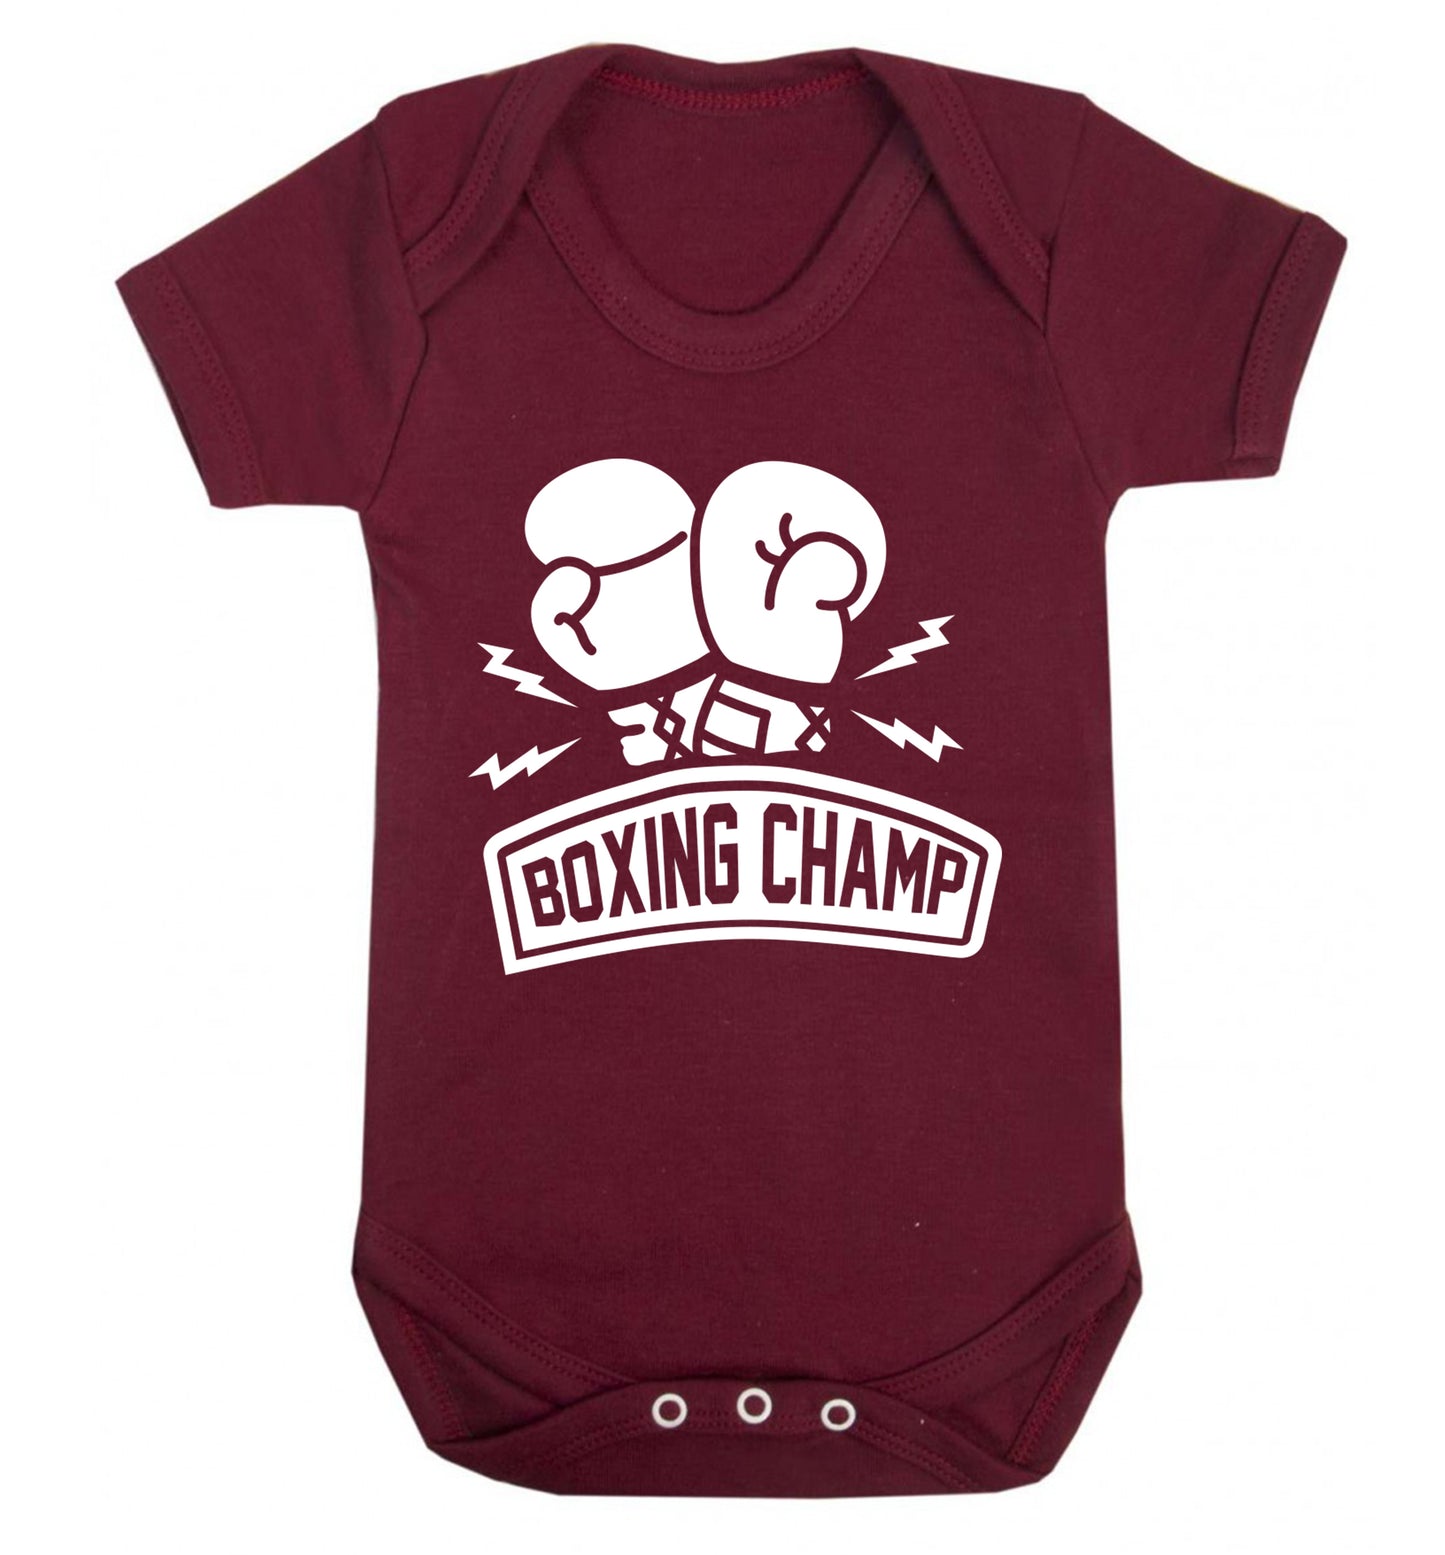 Boxing Champ Baby Vest maroon 18-24 months